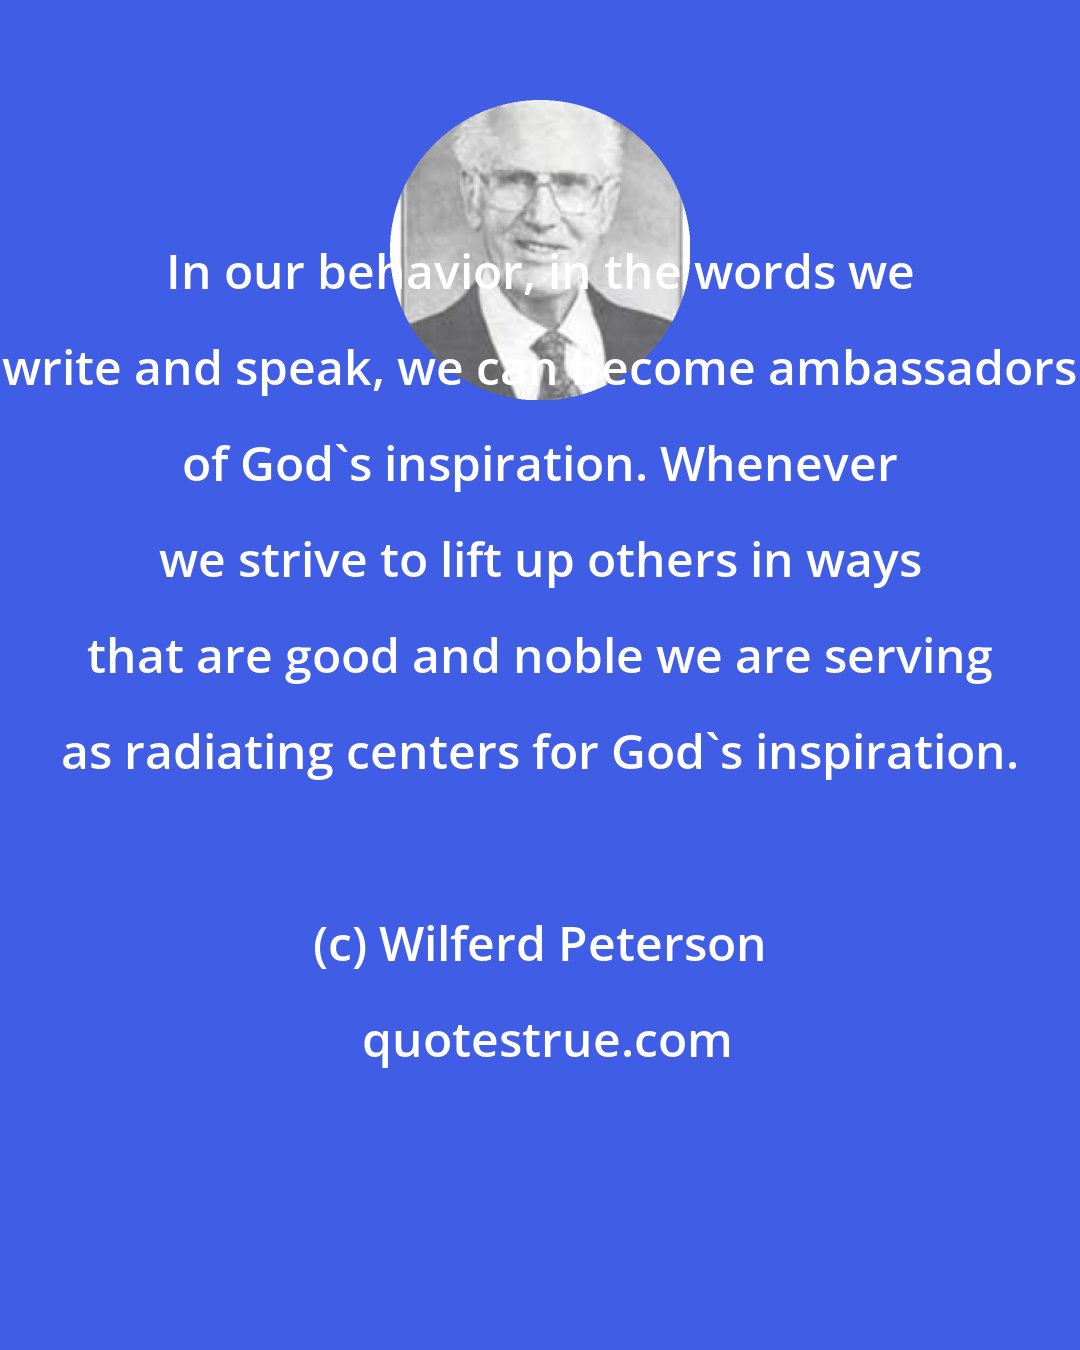 Wilferd Peterson: In our behavior, in the words we write and speak, we can become ambassadors of God's inspiration. Whenever we strive to lift up others in ways that are good and noble we are serving as radiating centers for God's inspiration.